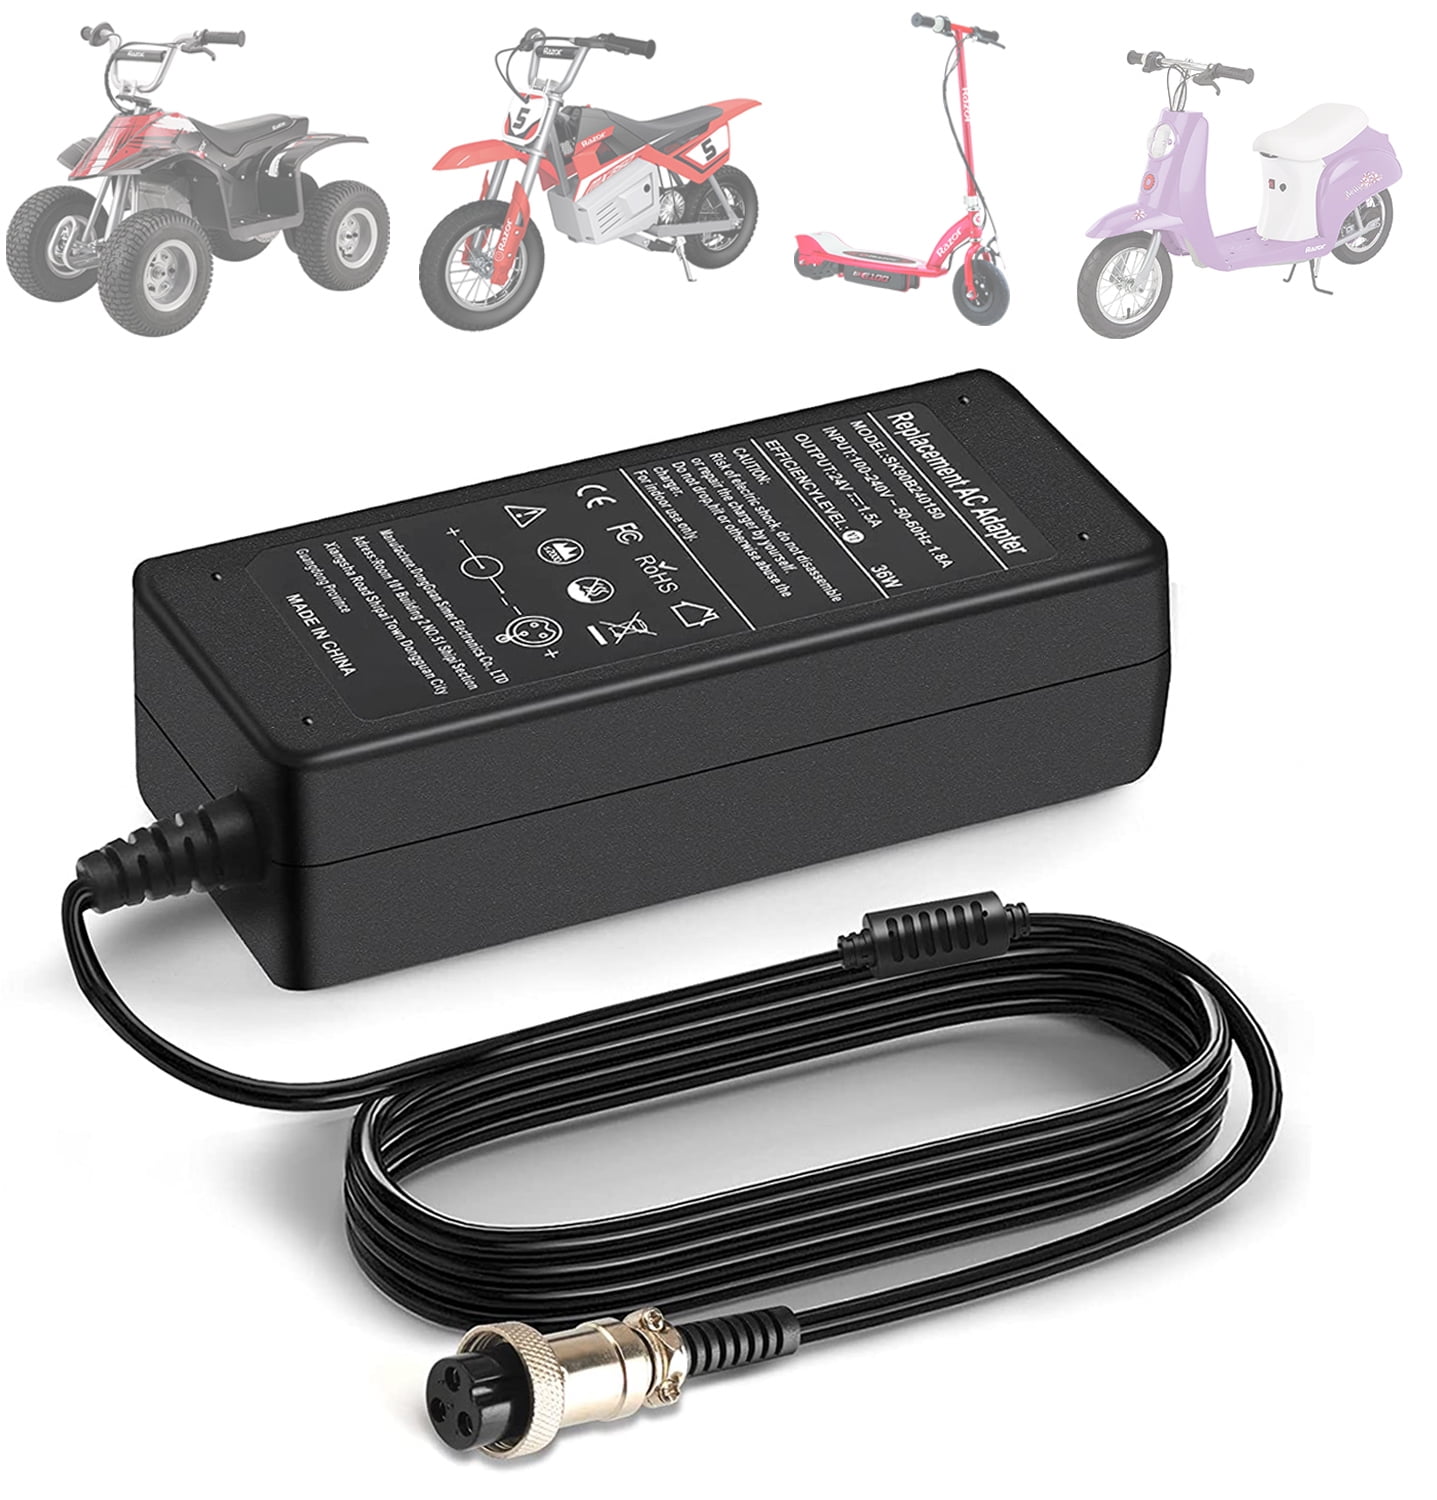 36W 24V 1.5A Electric Scooter Battery Charger for Razor E100 E125 E150 E175 E200 E300 E500 MX350 3-Prong;Mini Chopper; Dirt Quad; Pocket Rocket; Pocket Mod Electric Scooter 3-Prong Inline 